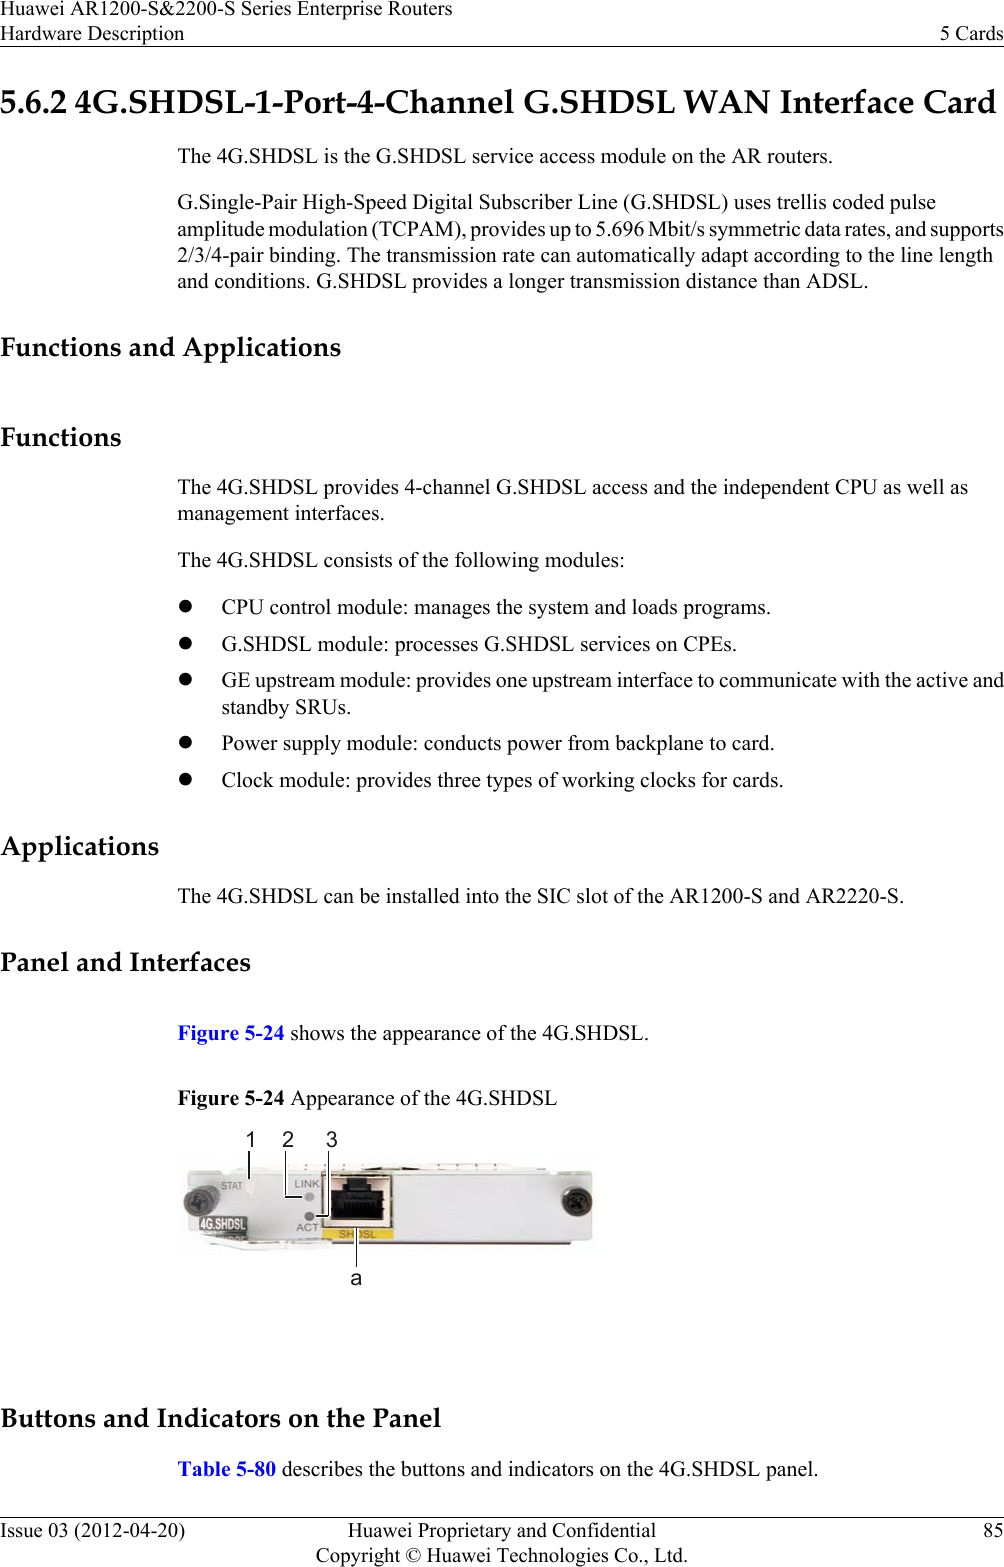 5.6.2 4G.SHDSL-1-Port-4-Channel G.SHDSL WAN Interface CardThe 4G.SHDSL is the G.SHDSL service access module on the AR routers.G.Single-Pair High-Speed Digital Subscriber Line (G.SHDSL) uses trellis coded pulseamplitude modulation (TCPAM), provides up to 5.696 Mbit/s symmetric data rates, and supports2/3/4-pair binding. The transmission rate can automatically adapt according to the line lengthand conditions. G.SHDSL provides a longer transmission distance than ADSL.Functions and ApplicationsFunctionsThe 4G.SHDSL provides 4-channel G.SHDSL access and the independent CPU as well asmanagement interfaces.The 4G.SHDSL consists of the following modules:lCPU control module: manages the system and loads programs.lG.SHDSL module: processes G.SHDSL services on CPEs.lGE upstream module: provides one upstream interface to communicate with the active andstandby SRUs.lPower supply module: conducts power from backplane to card.lClock module: provides three types of working clocks for cards.ApplicationsThe 4G.SHDSL can be installed into the SIC slot of the AR1200-S and AR2220-S.Panel and InterfacesFigure 5-24 shows the appearance of the 4G.SHDSL.Figure 5-24 Appearance of the 4G.SHDSL1 2 3a Buttons and Indicators on the PanelTable 5-80 describes the buttons and indicators on the 4G.SHDSL panel.Huawei AR1200-S&amp;2200-S Series Enterprise RoutersHardware Description 5 CardsIssue 03 (2012-04-20) Huawei Proprietary and ConfidentialCopyright © Huawei Technologies Co., Ltd.85